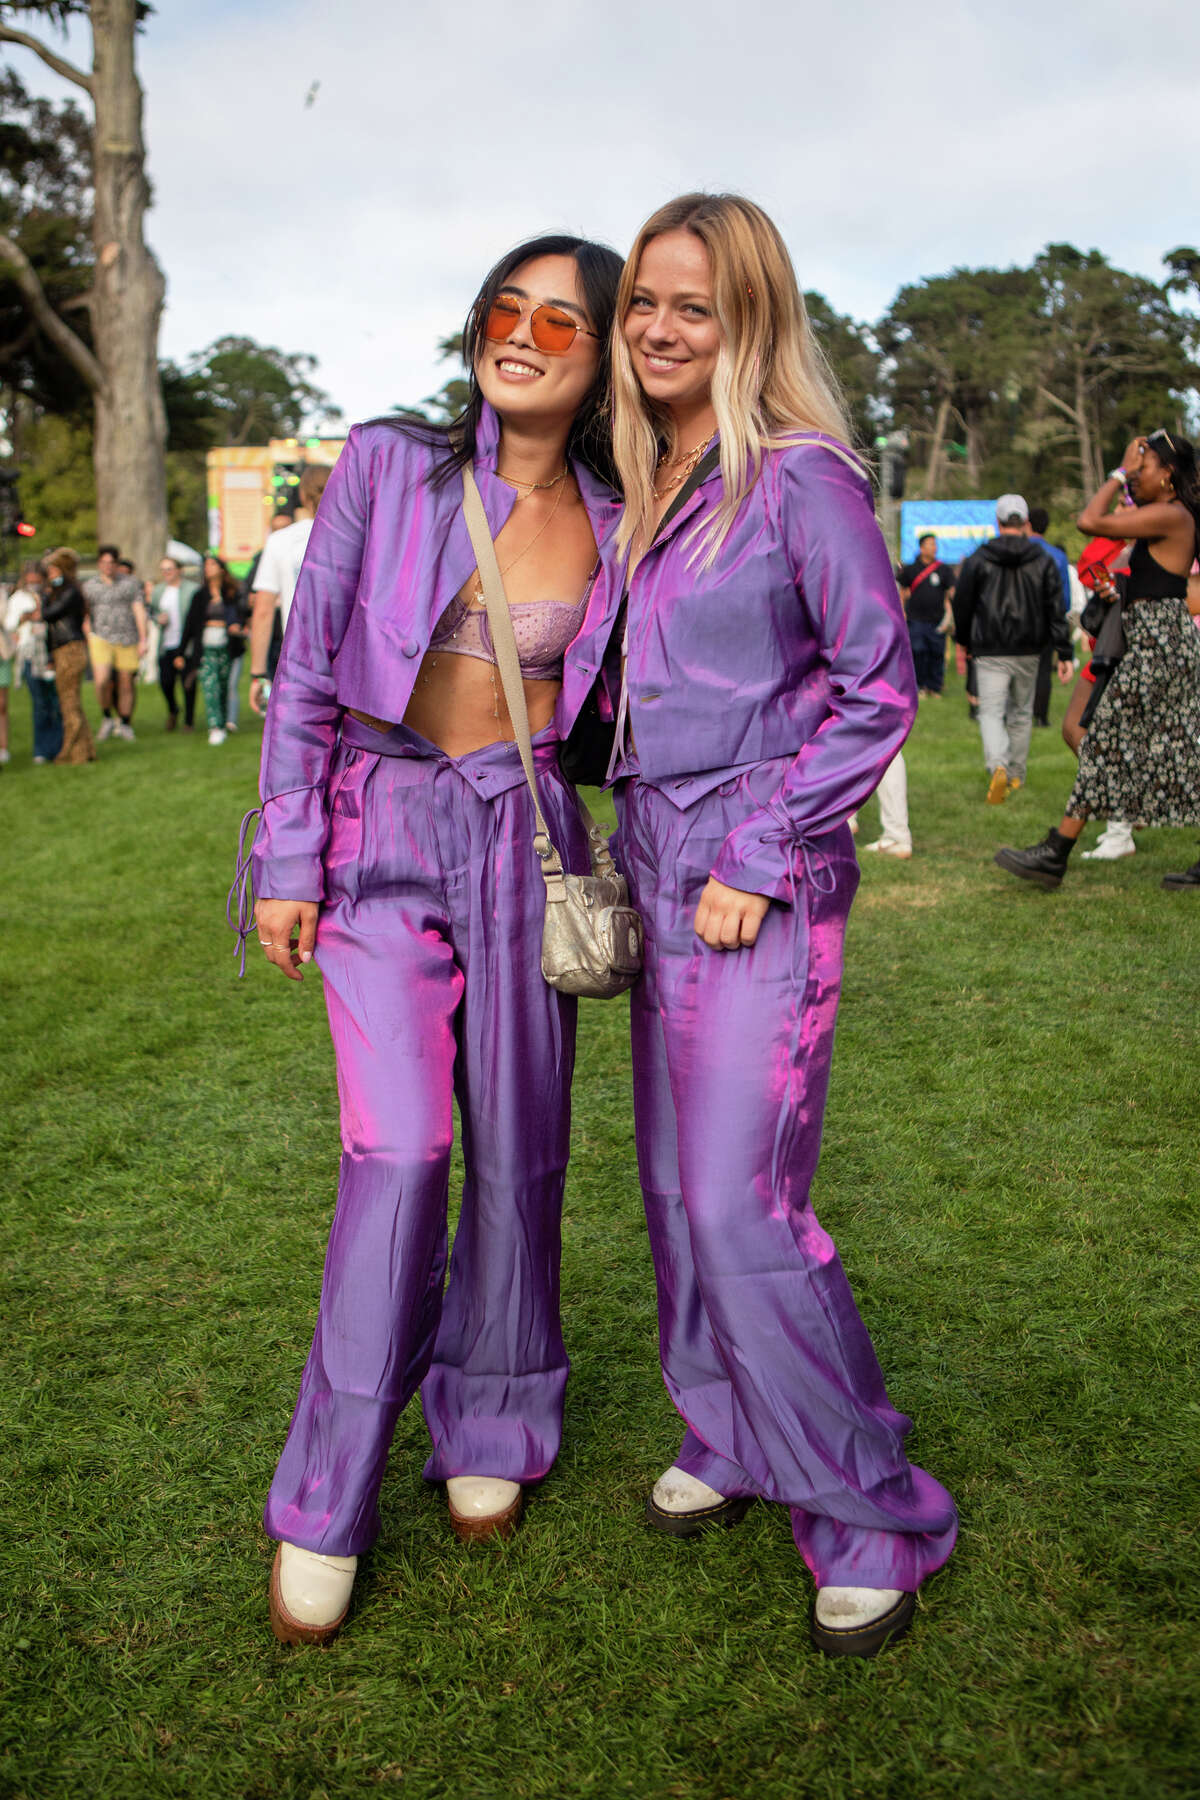 (Left to right) Vivian Fenn and Natalie Williams wear complementary outfits at Outside Lands in Golden Gate Park, San Francisco, CA on August 5, 2022.